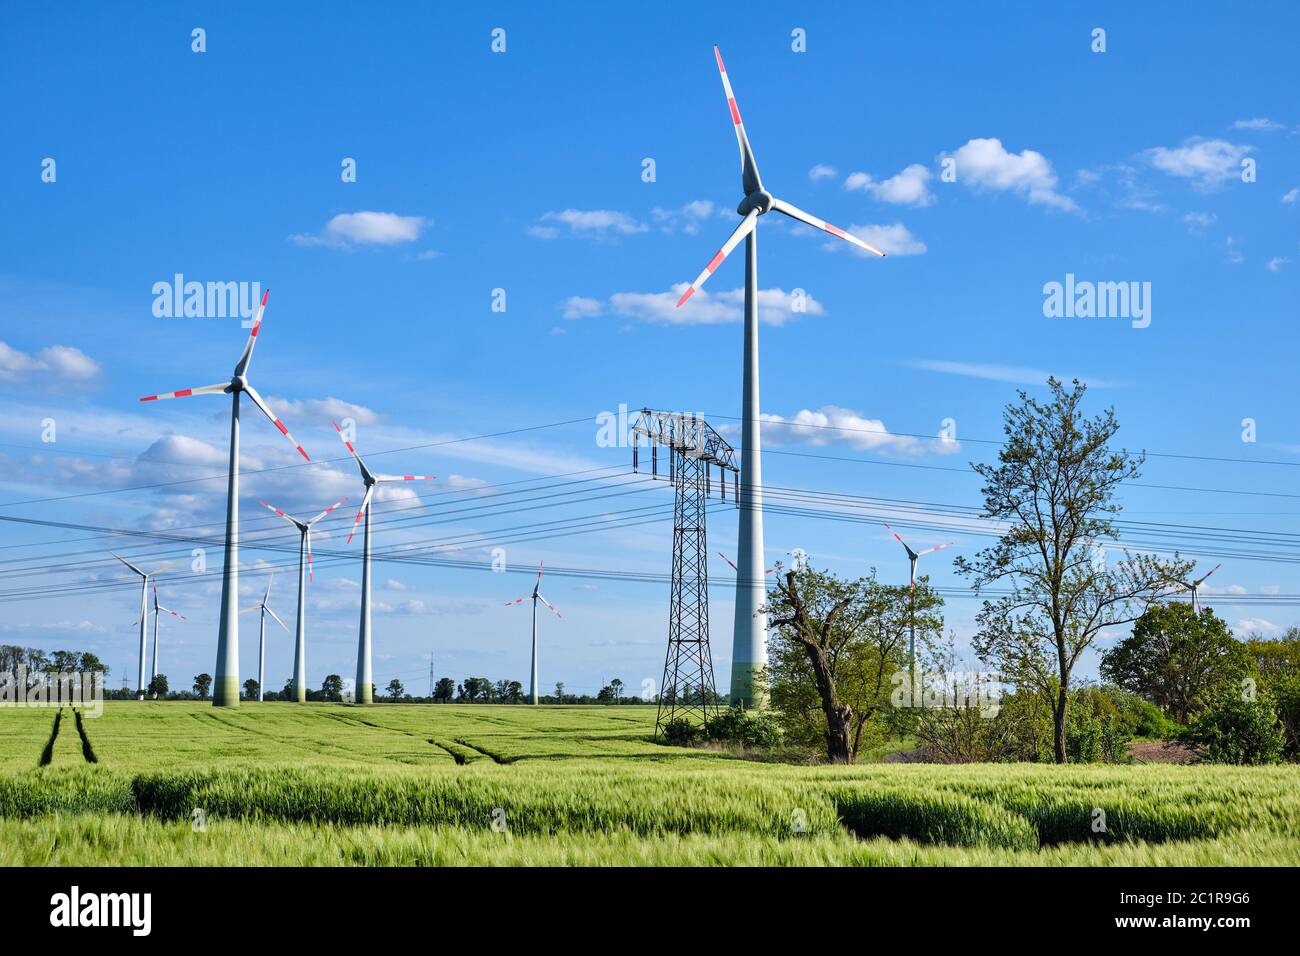 Overhead power lines and wind engines on a sunny day seen in Germany Stock Photo